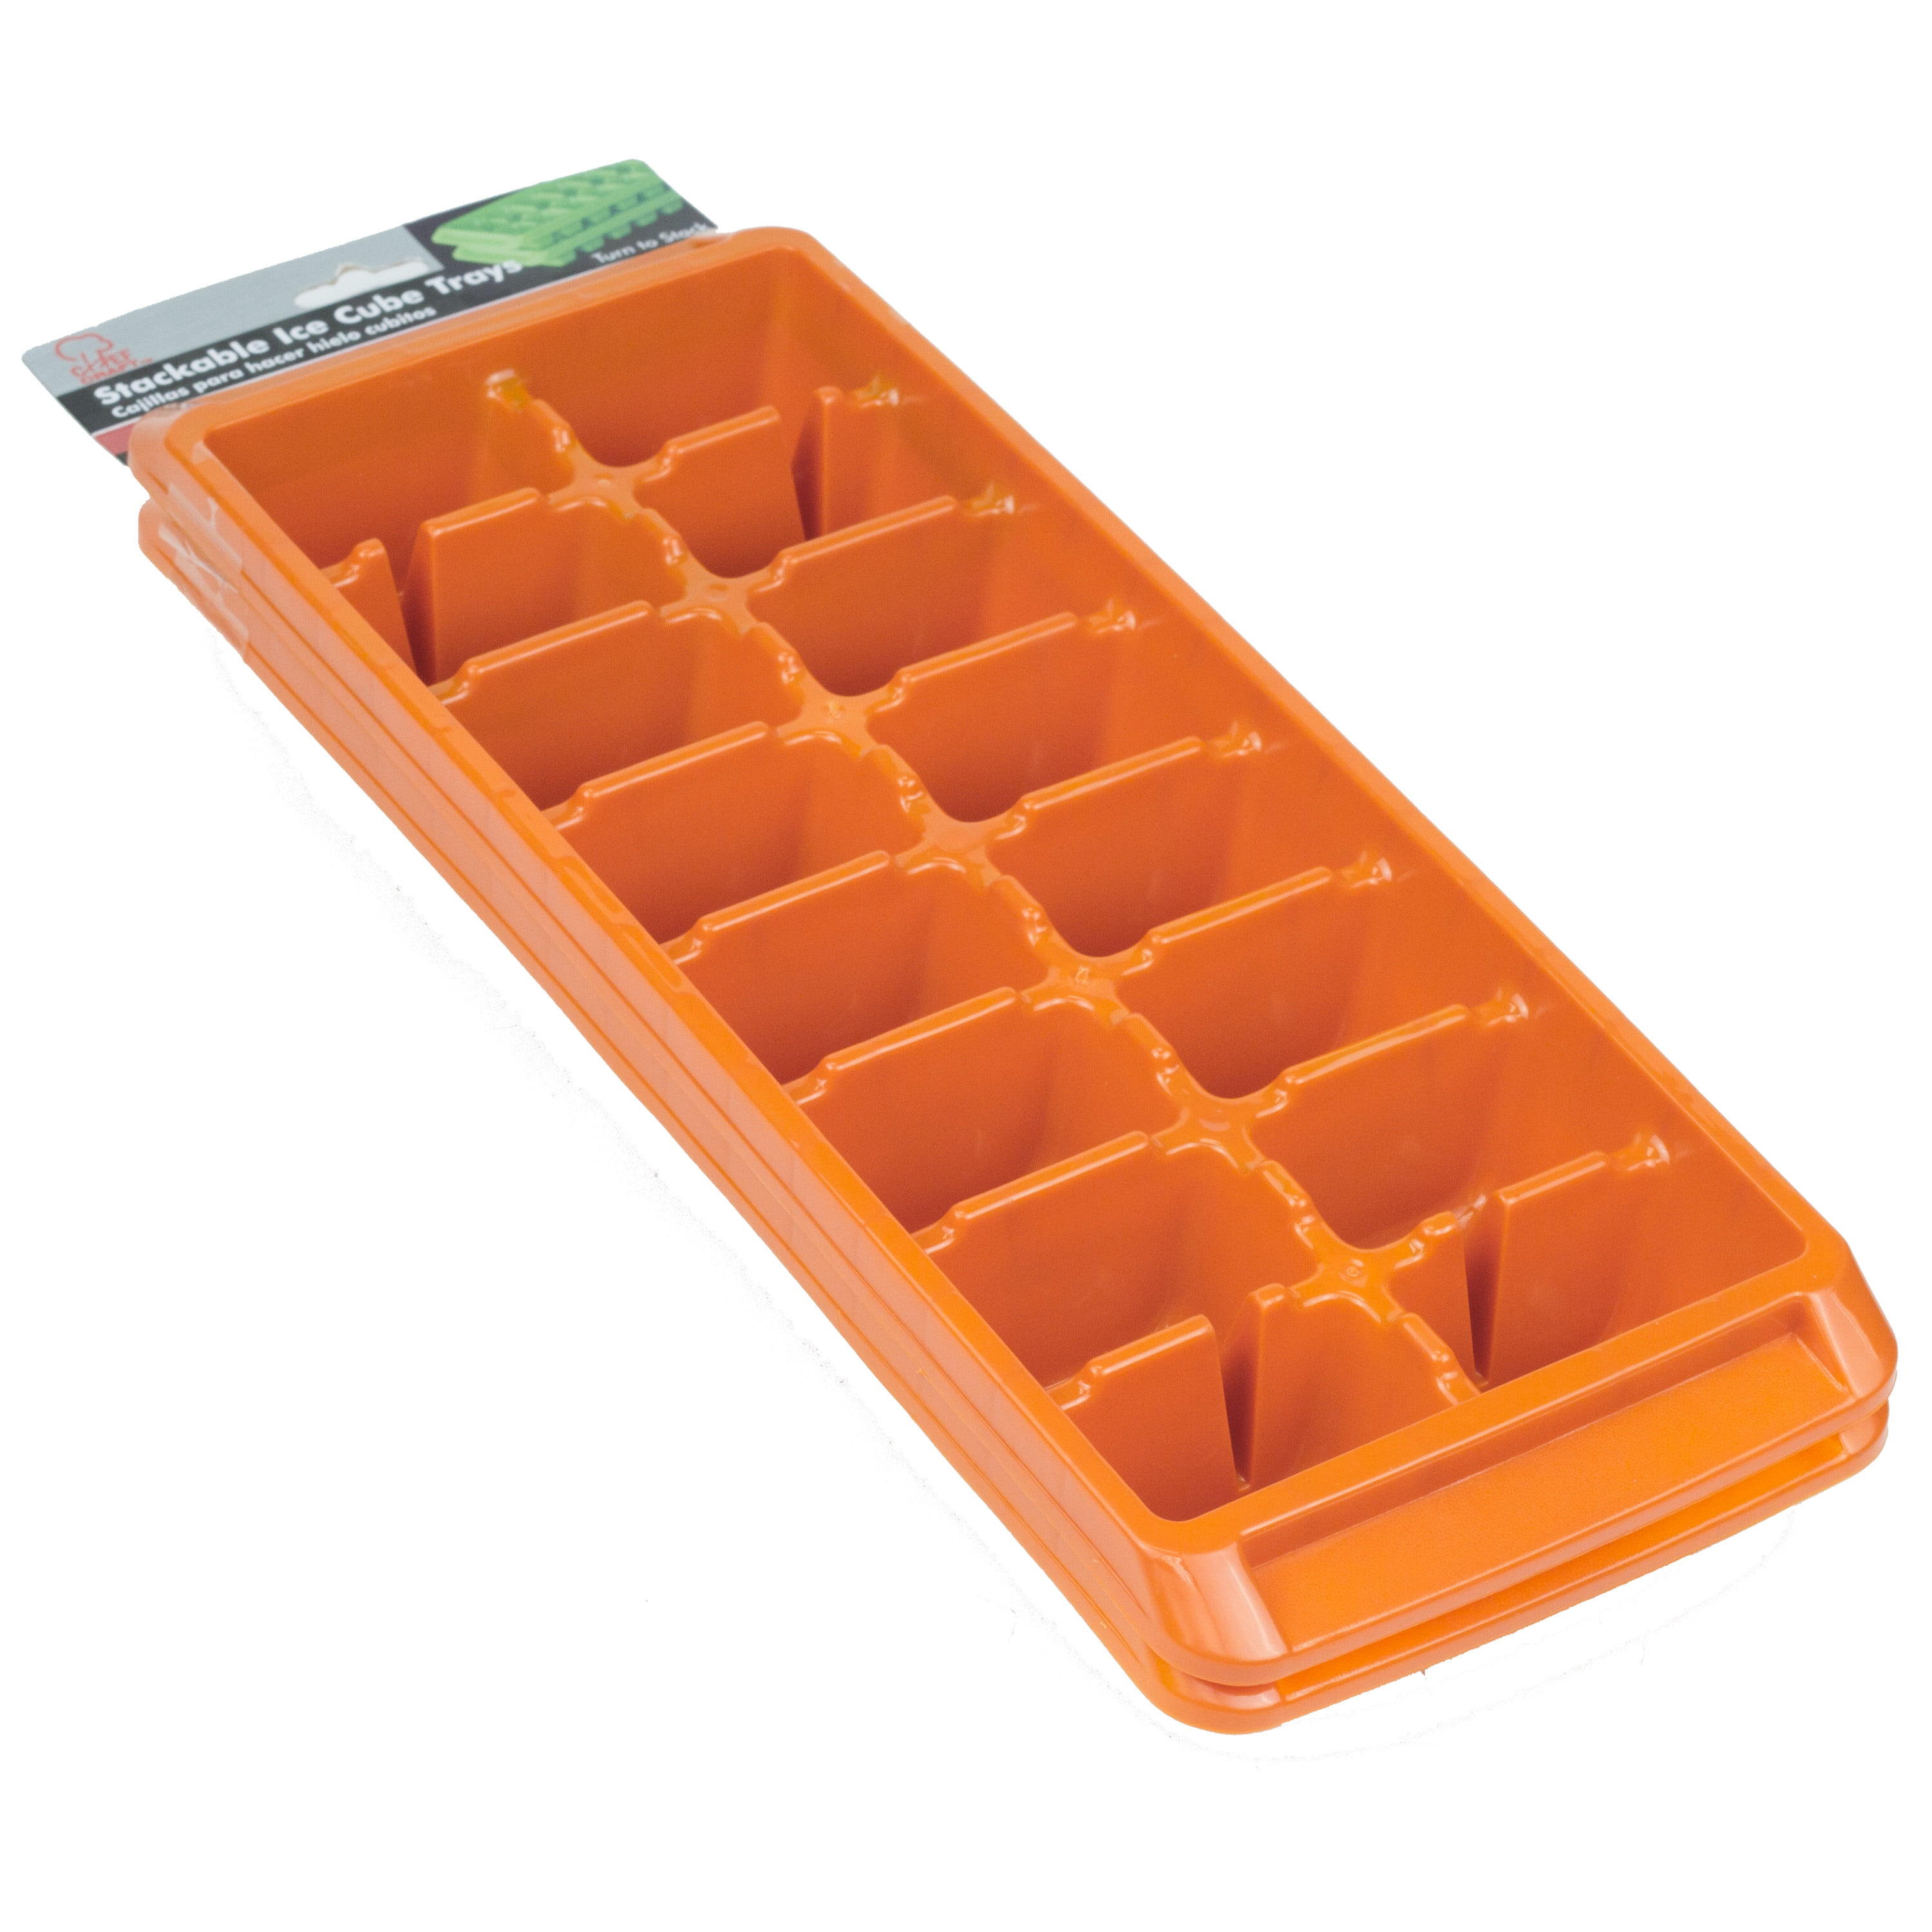 Stackable Ice Cube Trays，Space Saving 